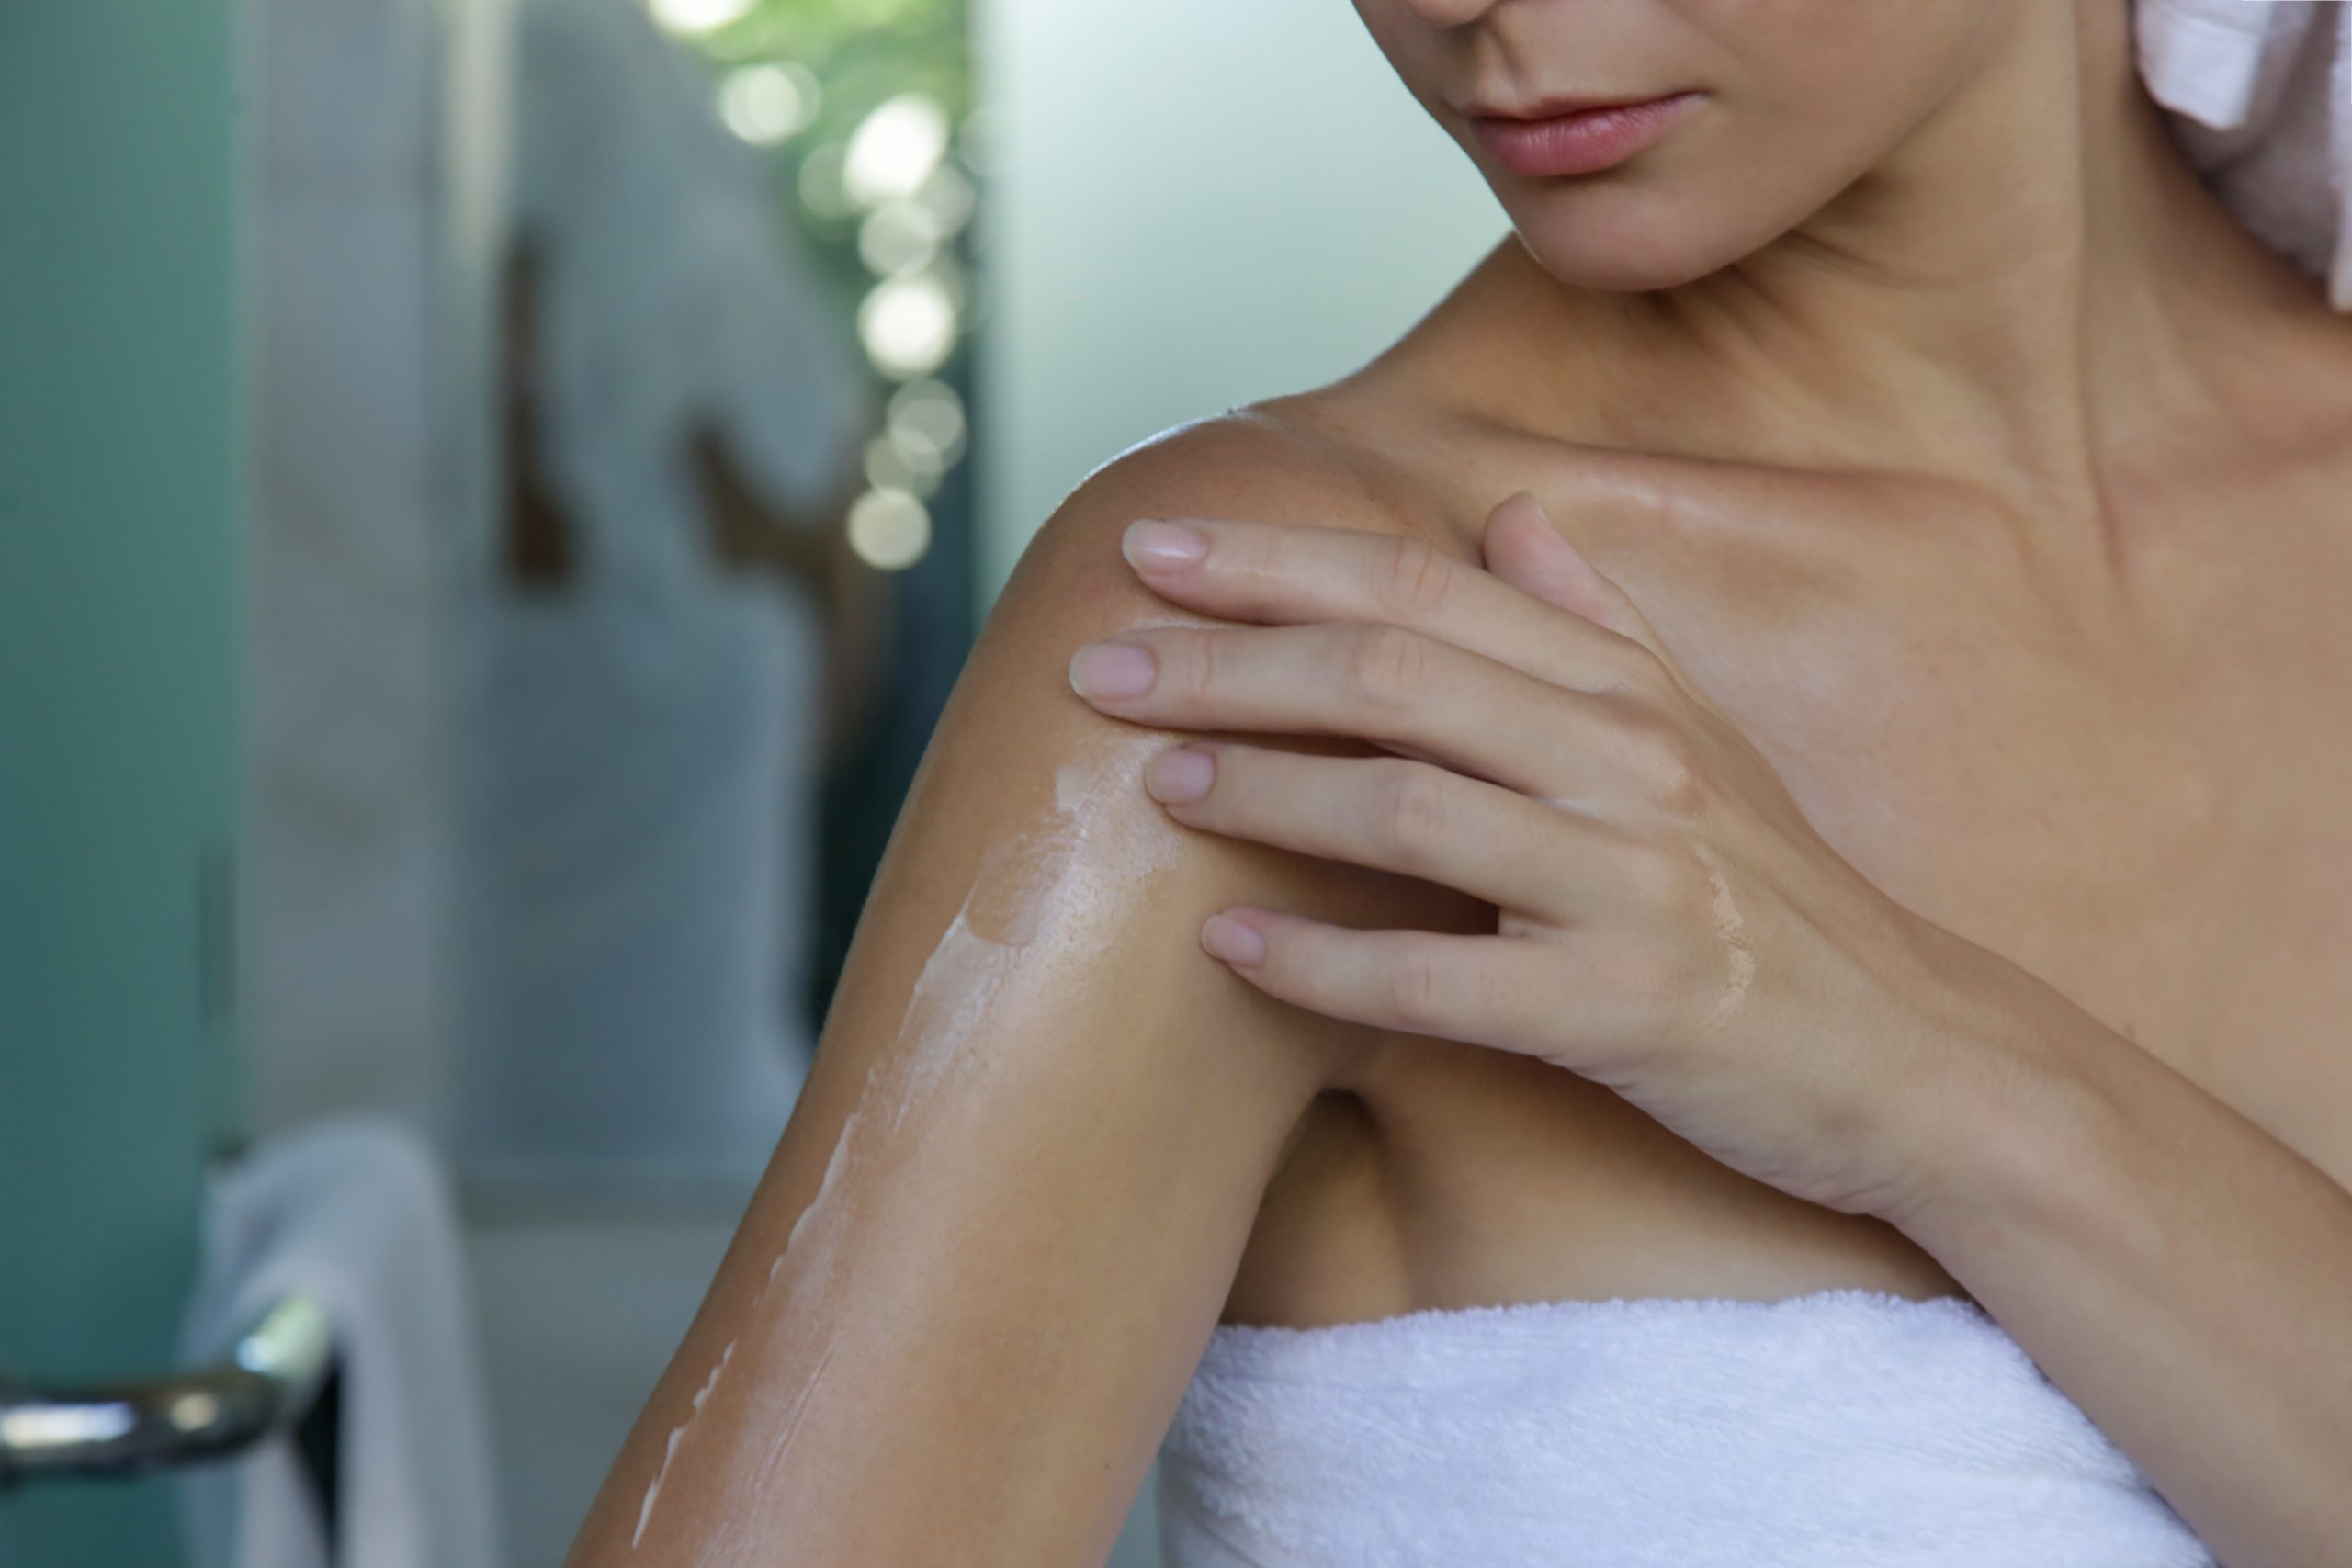 What You Should Know About CBD Body Lotion